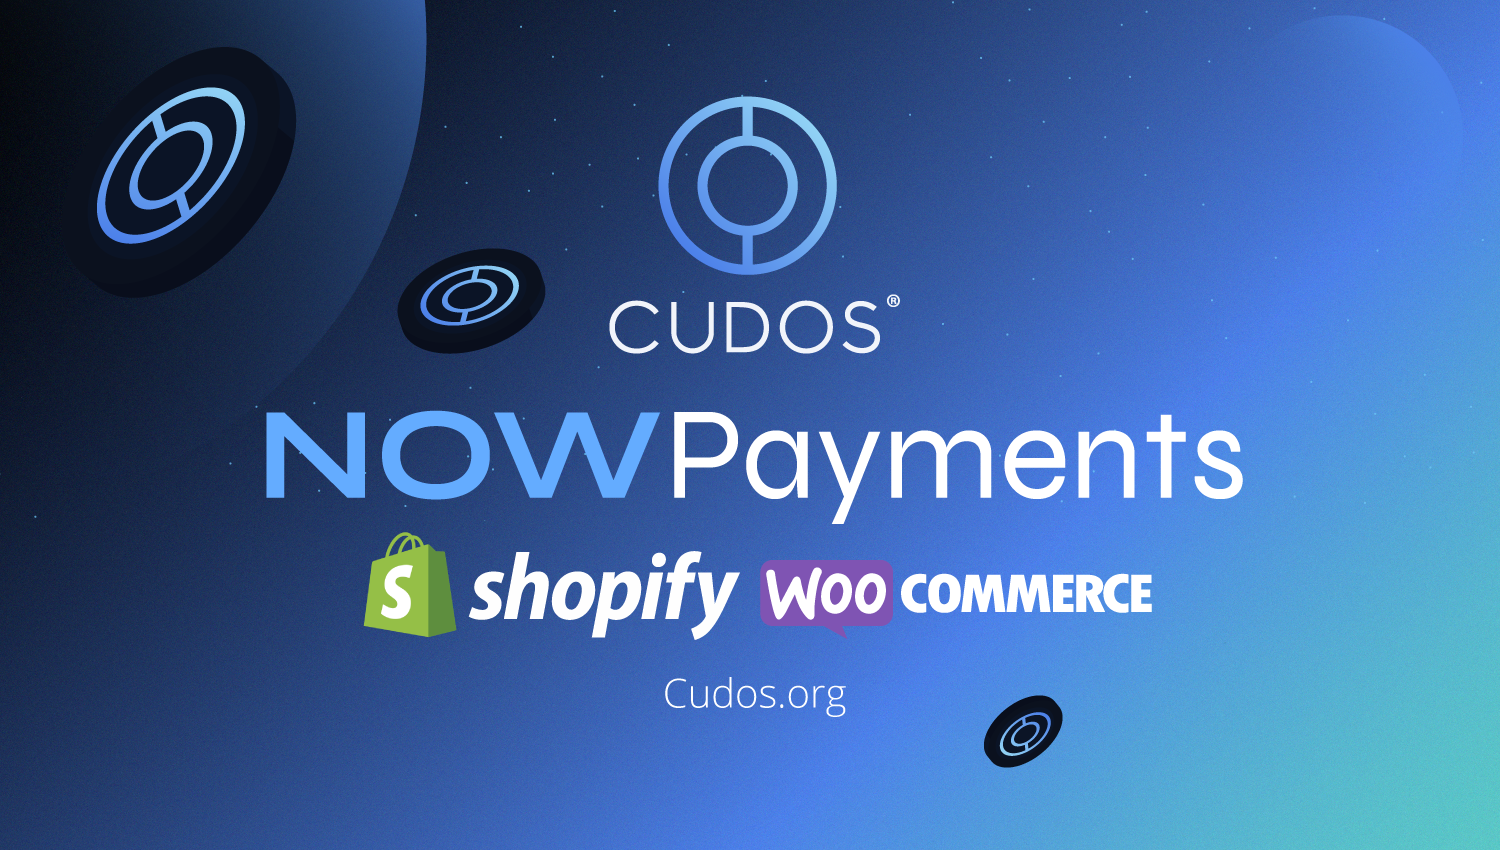 Pay with CUDOS on Shopify and WooCommerce via NOWPayments